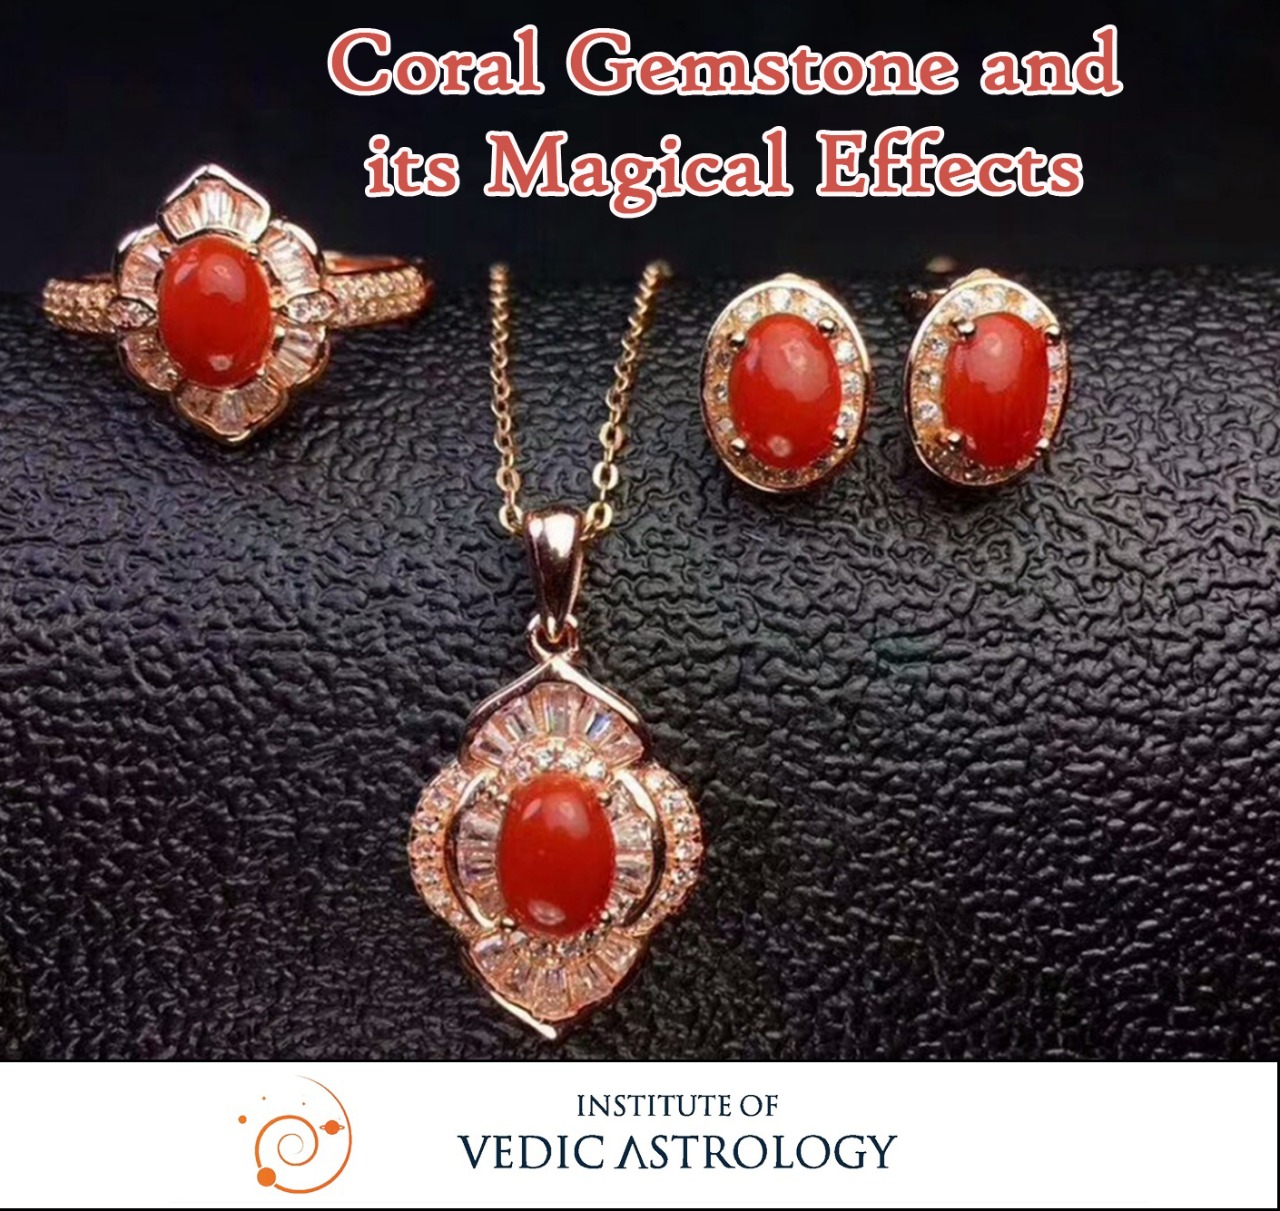 Coral Gemstone and its Magical Effects